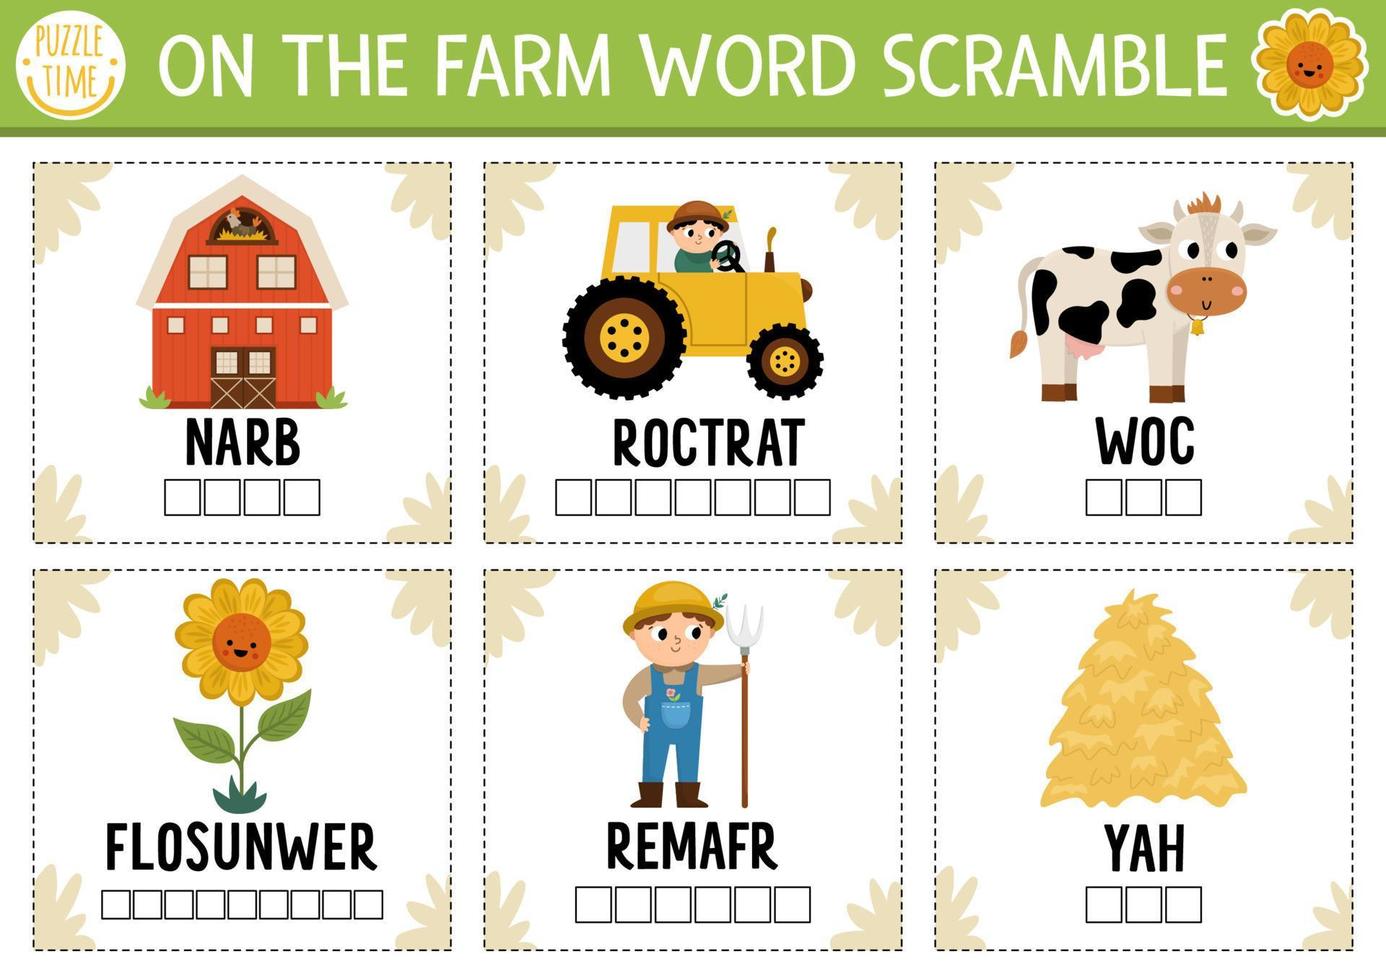 Vector on the farm word scramble activity page. English language game with barn, tractor, farmer for kids. Rural countryside family quiz with sunflower, cow. Educational printable worksheet.